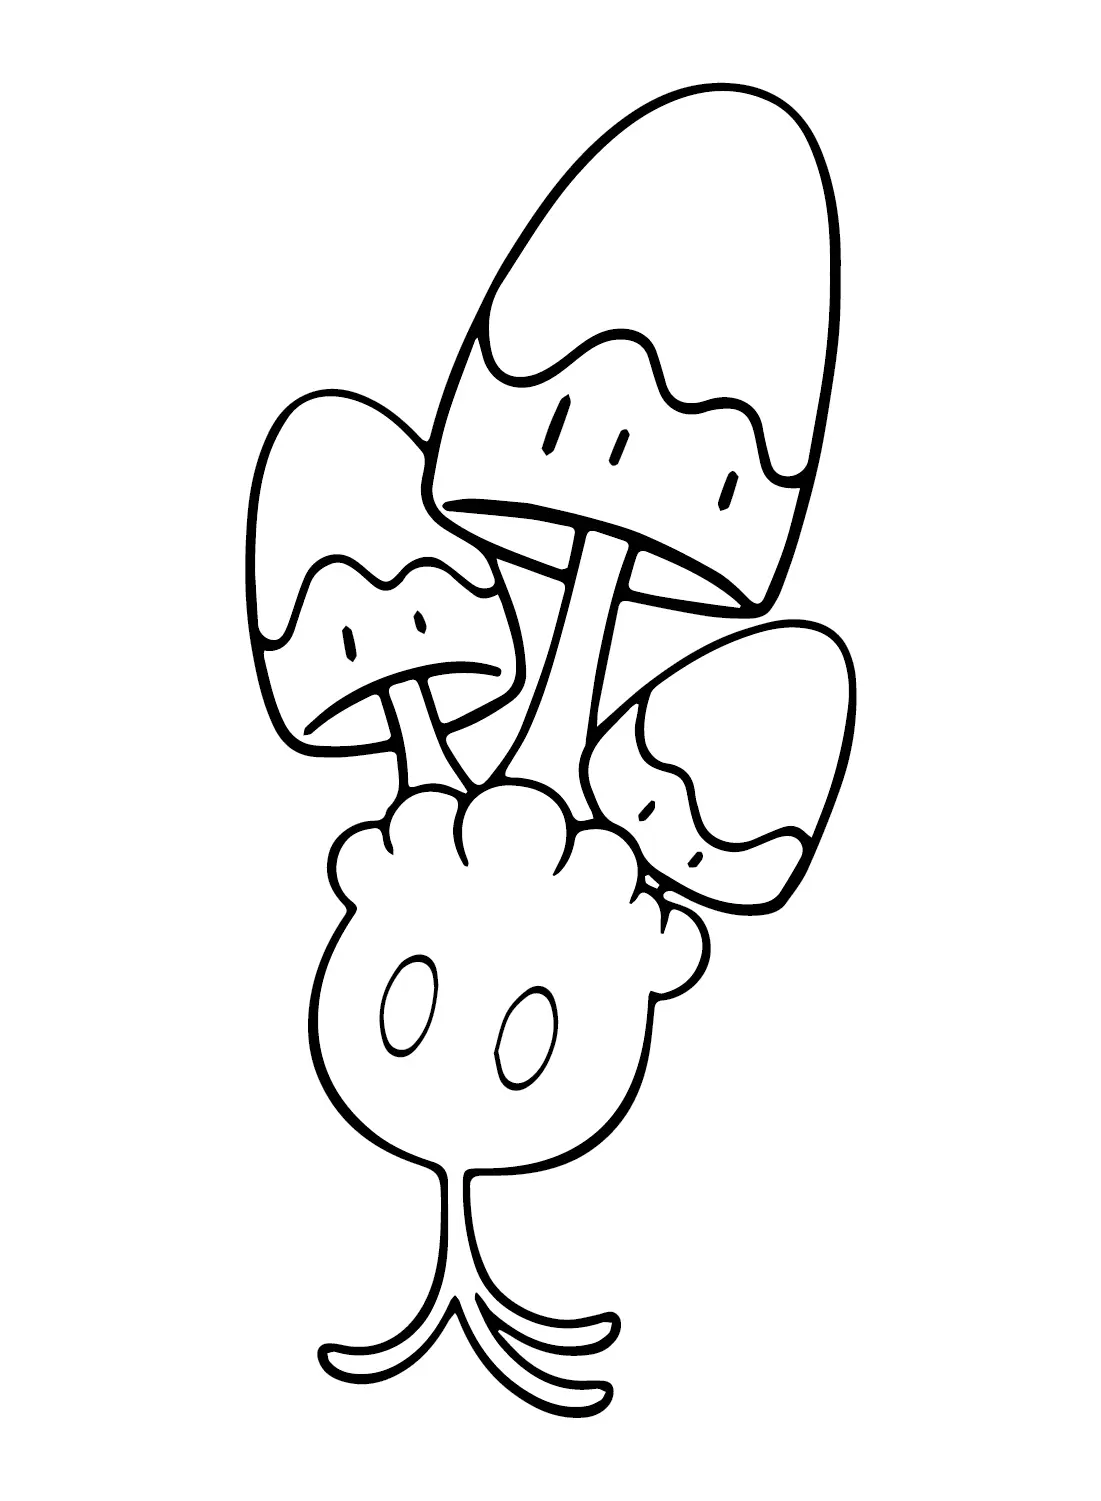 Morelull Coloring Pages